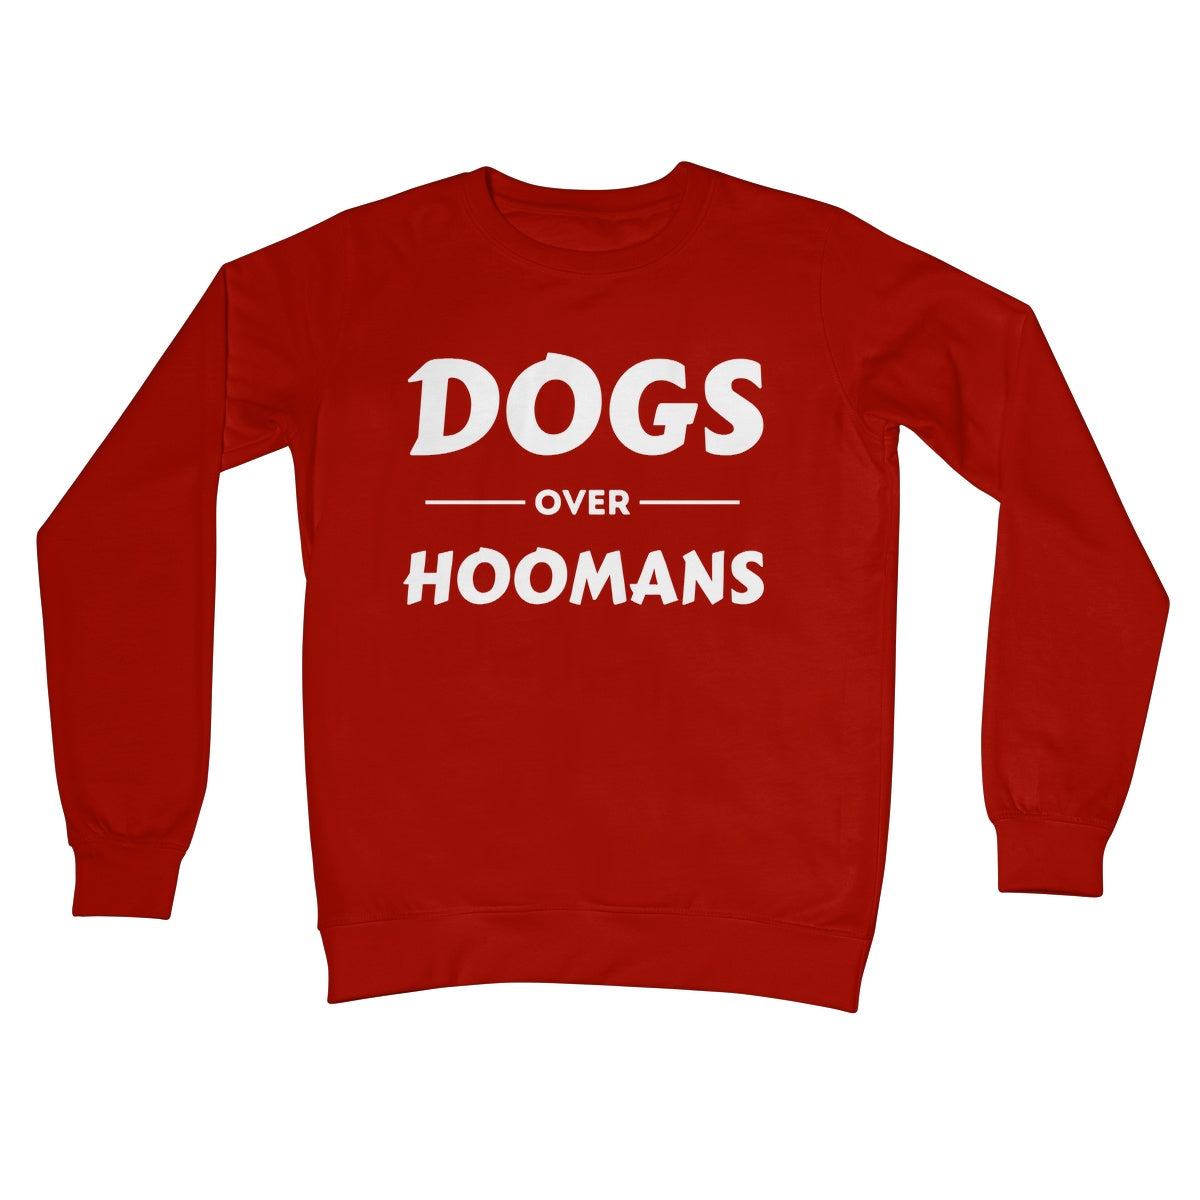 dogs over hoomans jumper red